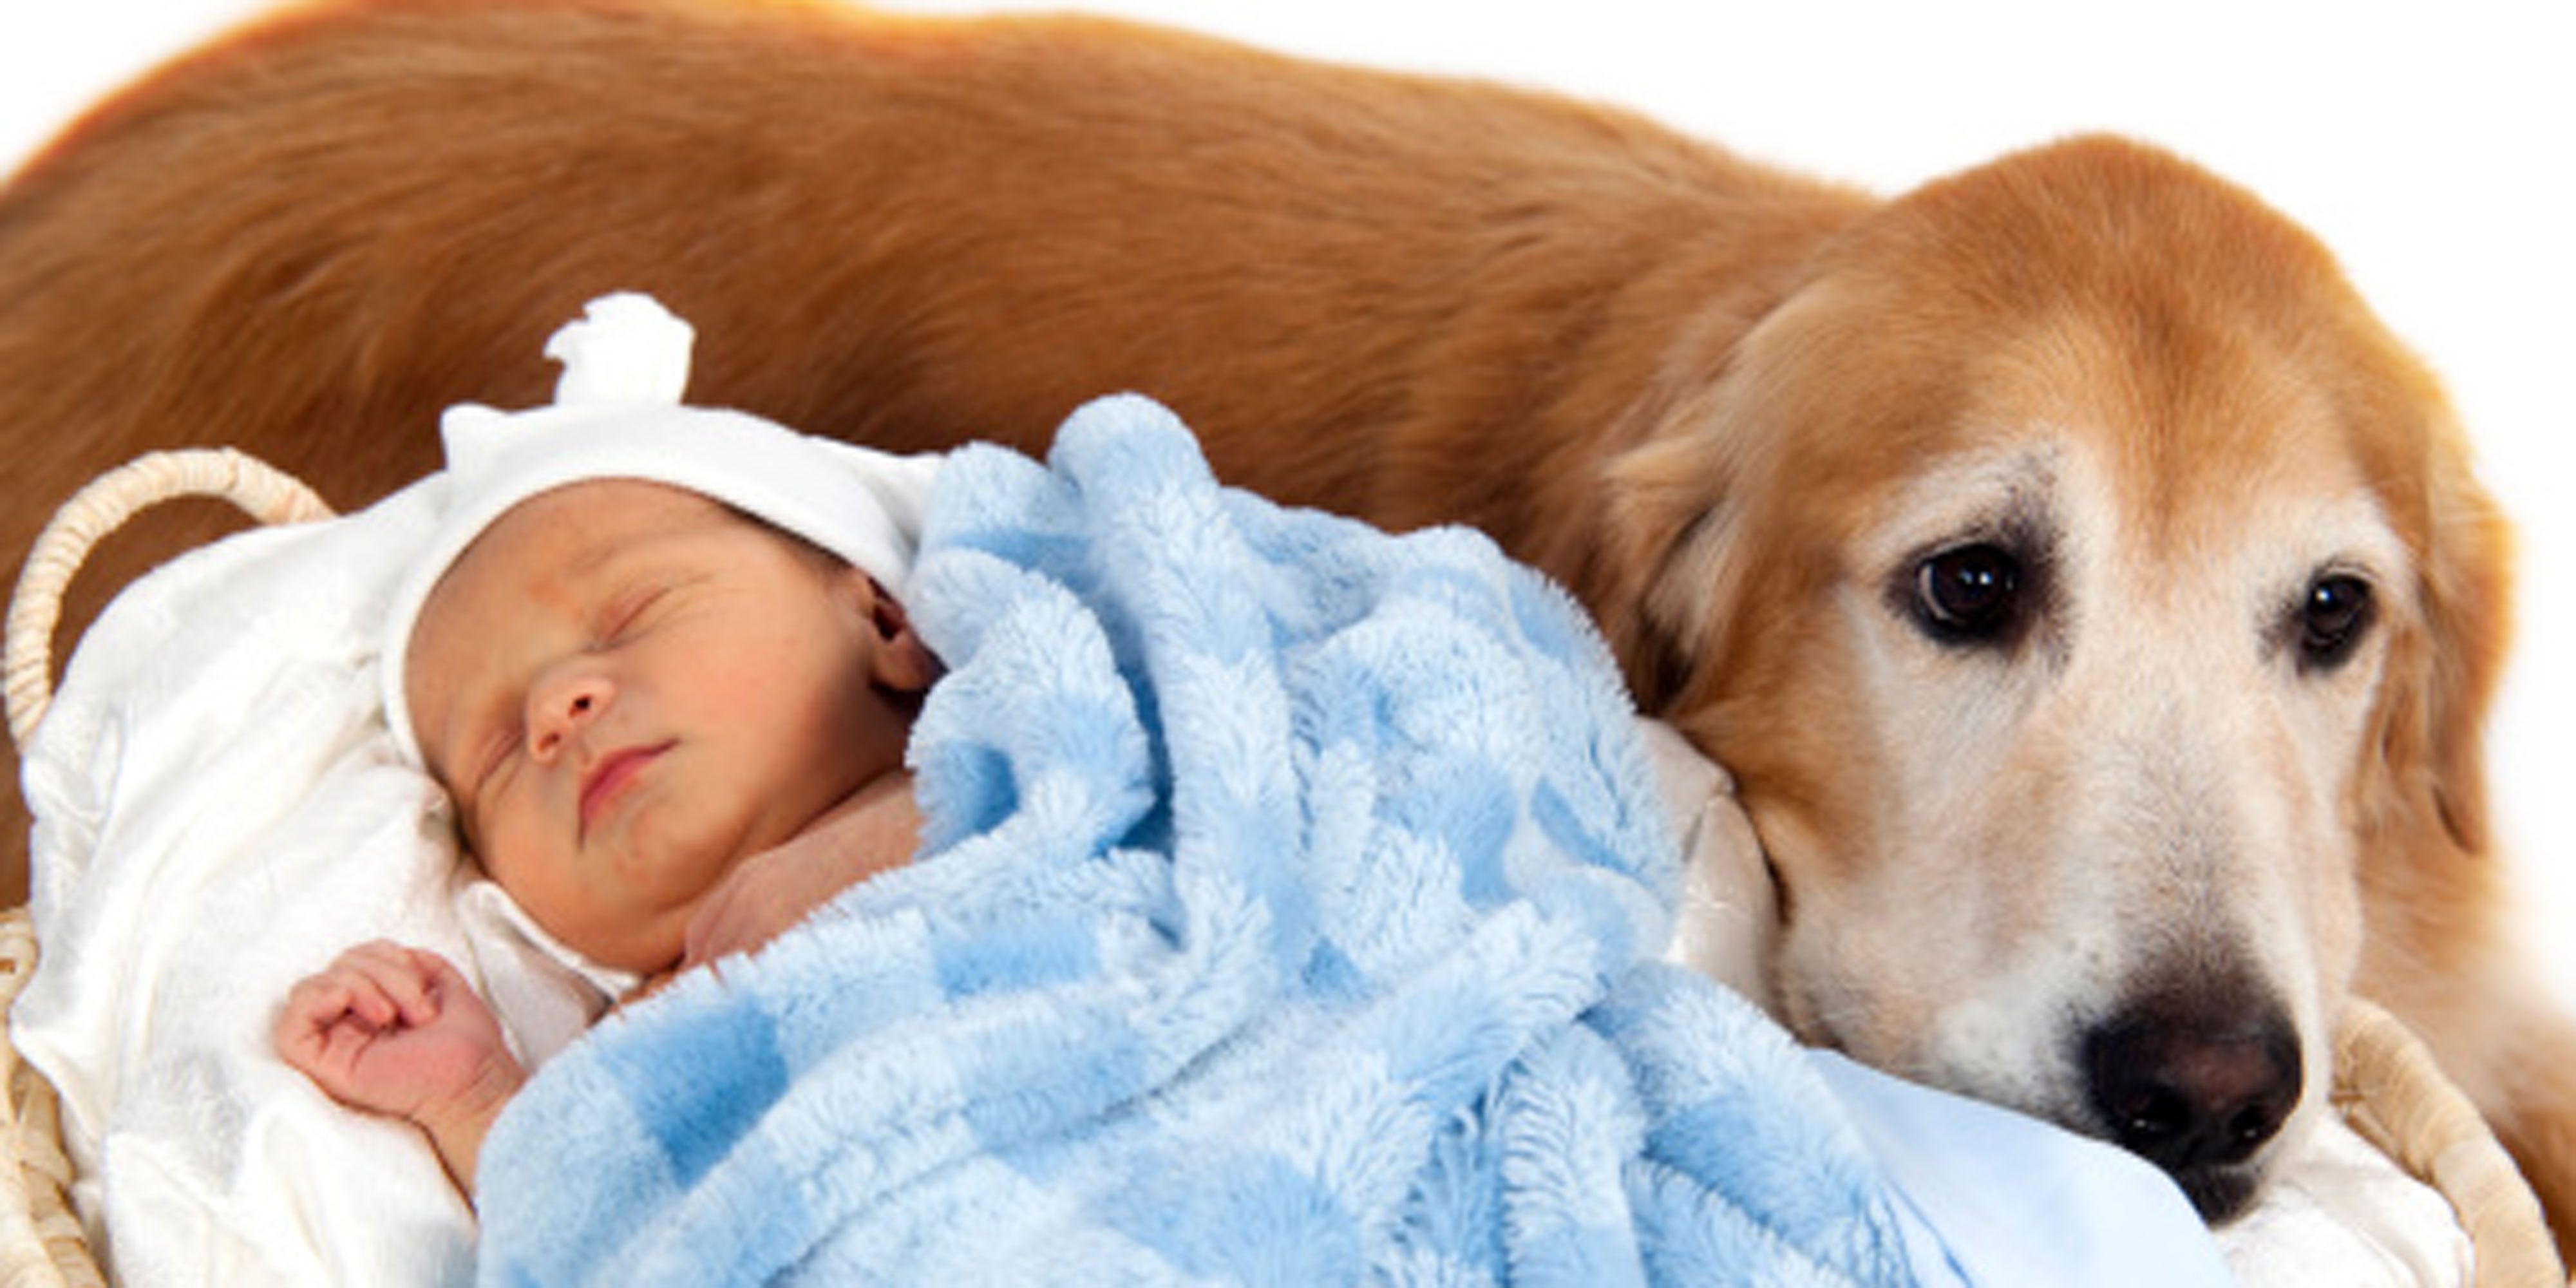 Pets, pregnancy and your baby